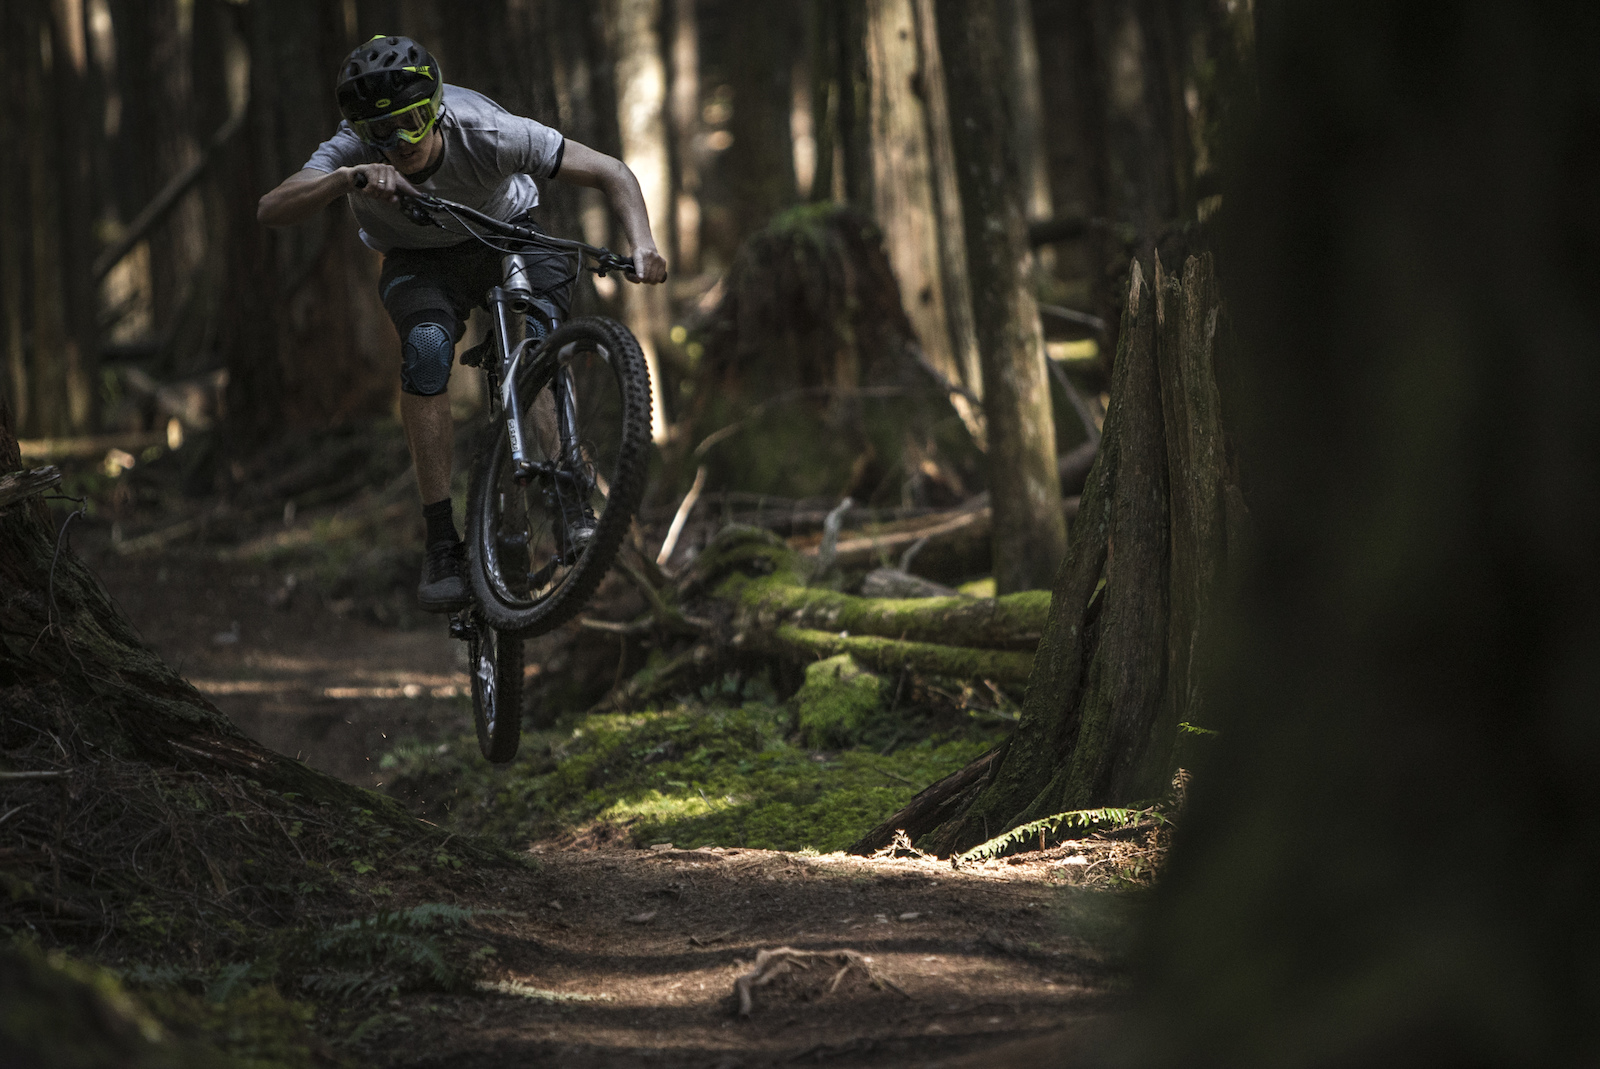 Fun ride in Squamish on one of the best trails .. :)